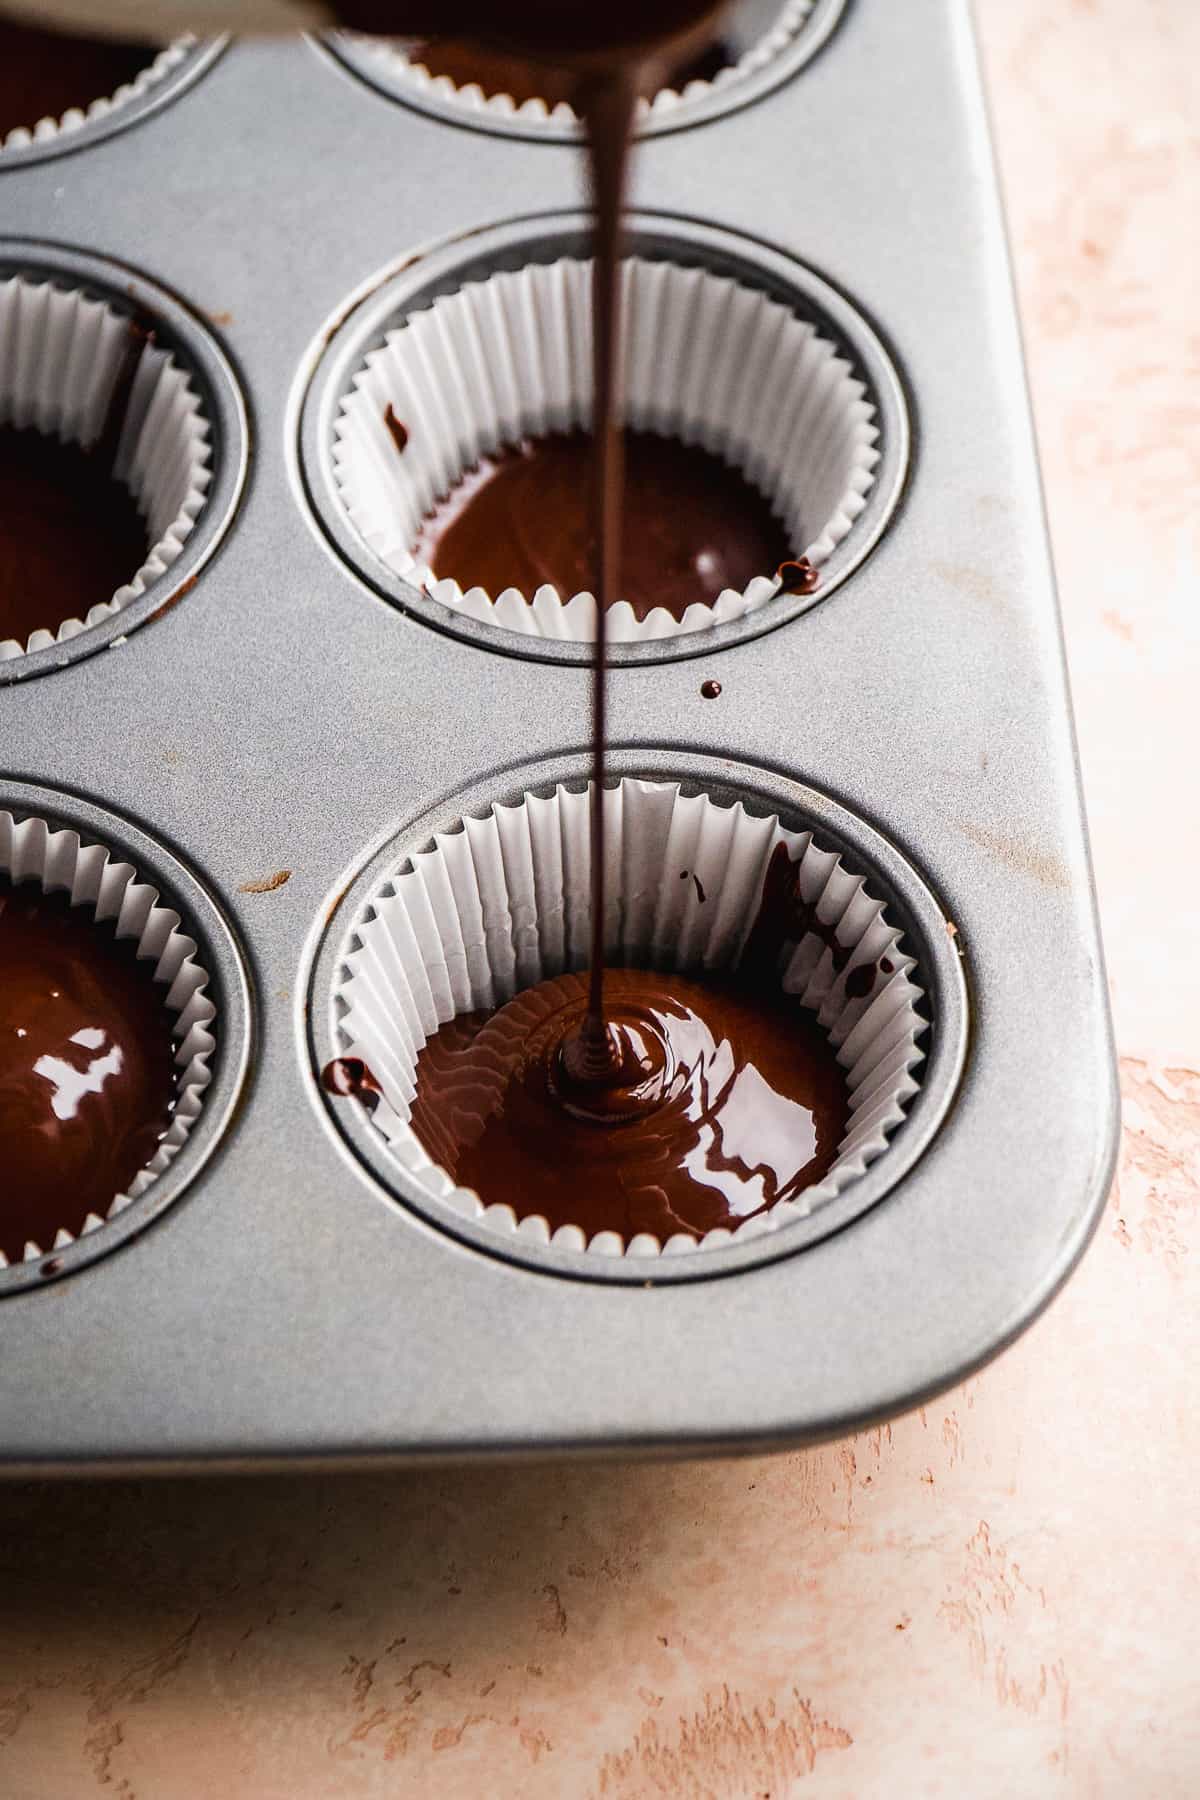 Chocolate being poured into a muffin pan with liners.